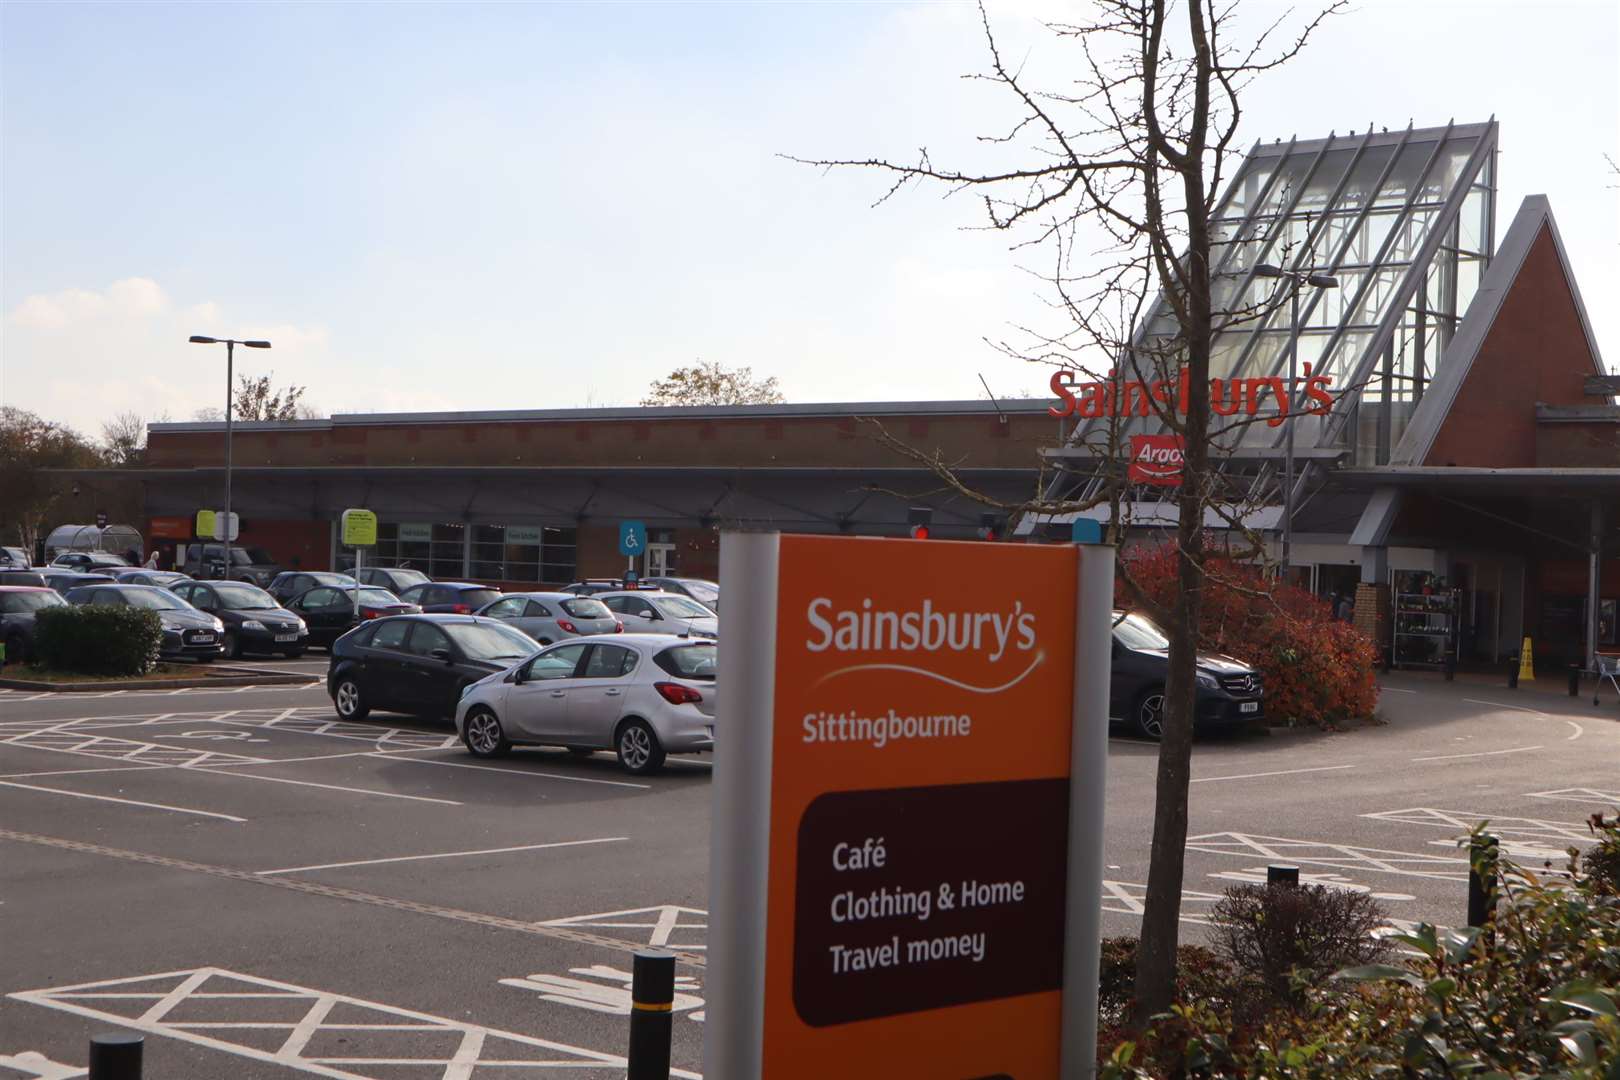 Sainsbury's has already changed the packaging on 1,500 items but plans to add 300 more